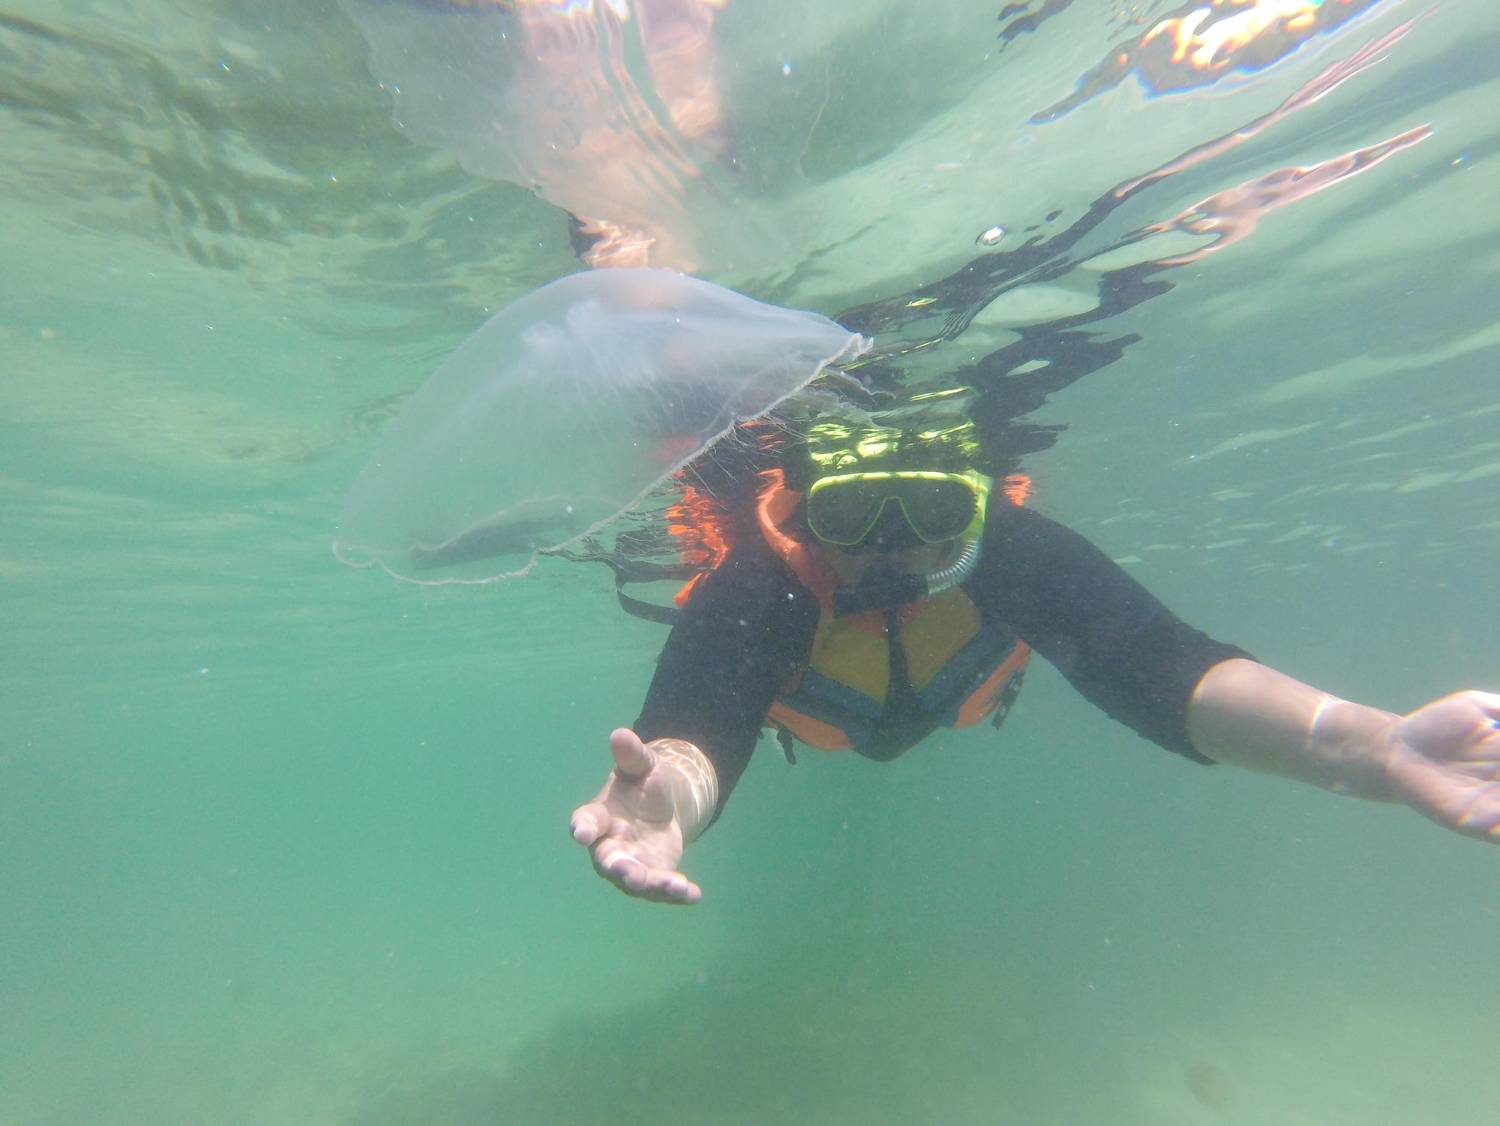 Snorkeler encountering a jellyfish underwater, a moment capturing the unpredictability of ocean exploration.